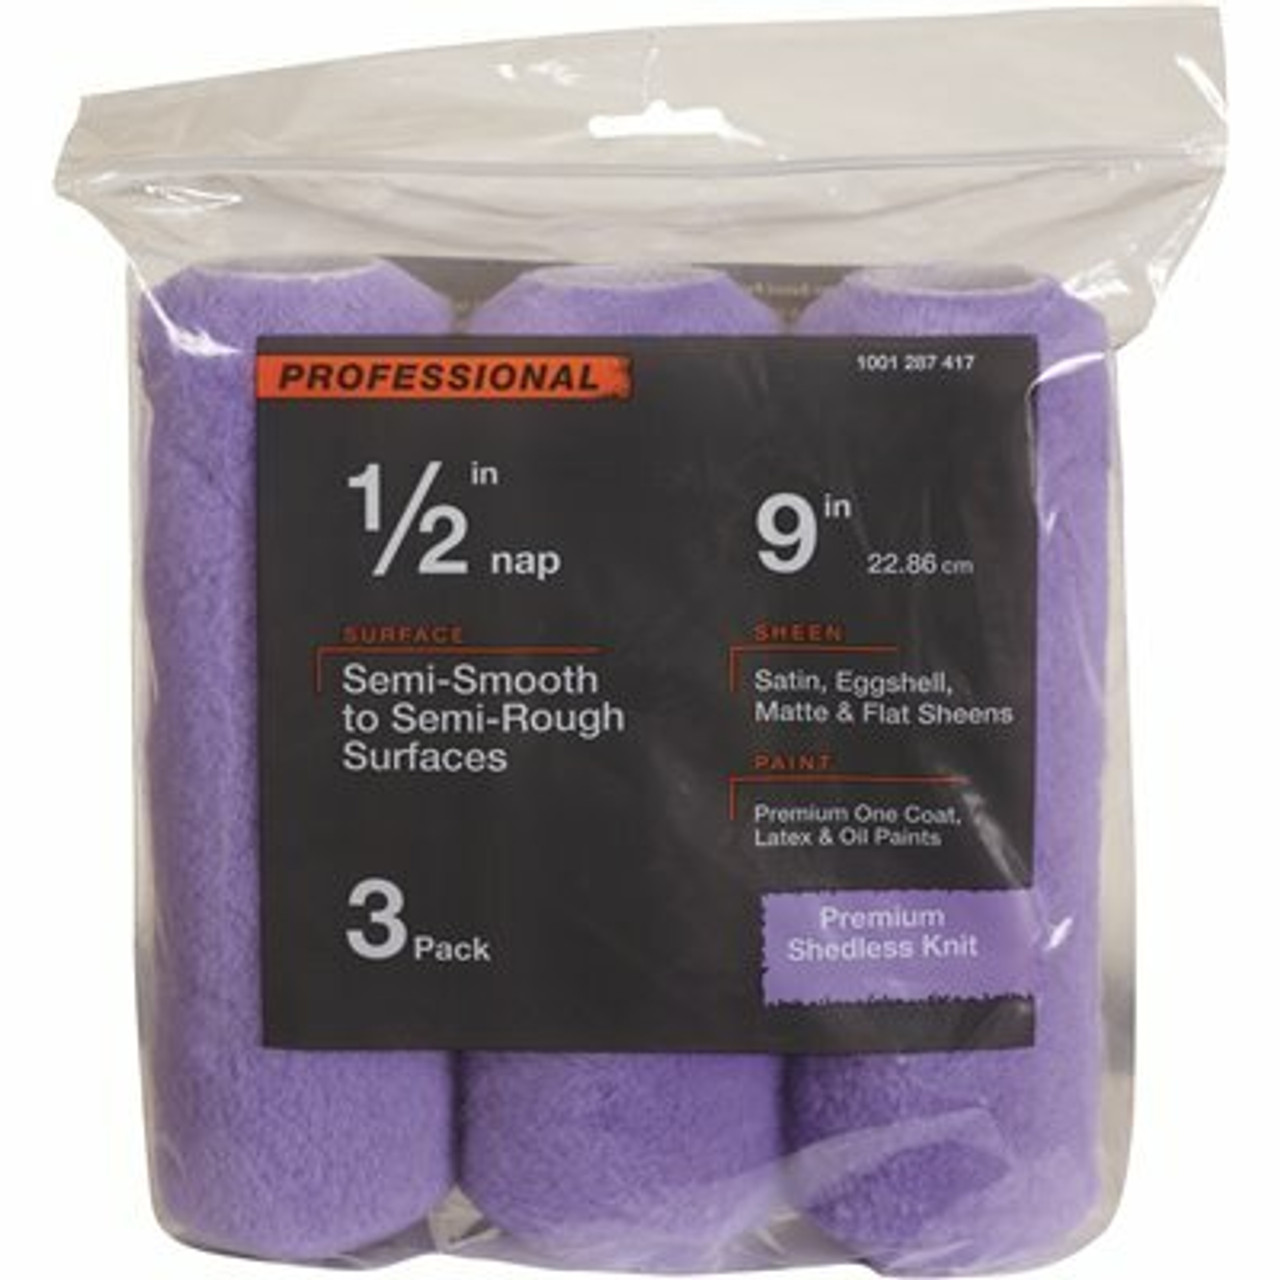 9 In. X 1/2 In. High-Capacity Polyester Knit Paint Roller Cover (3-Pack)